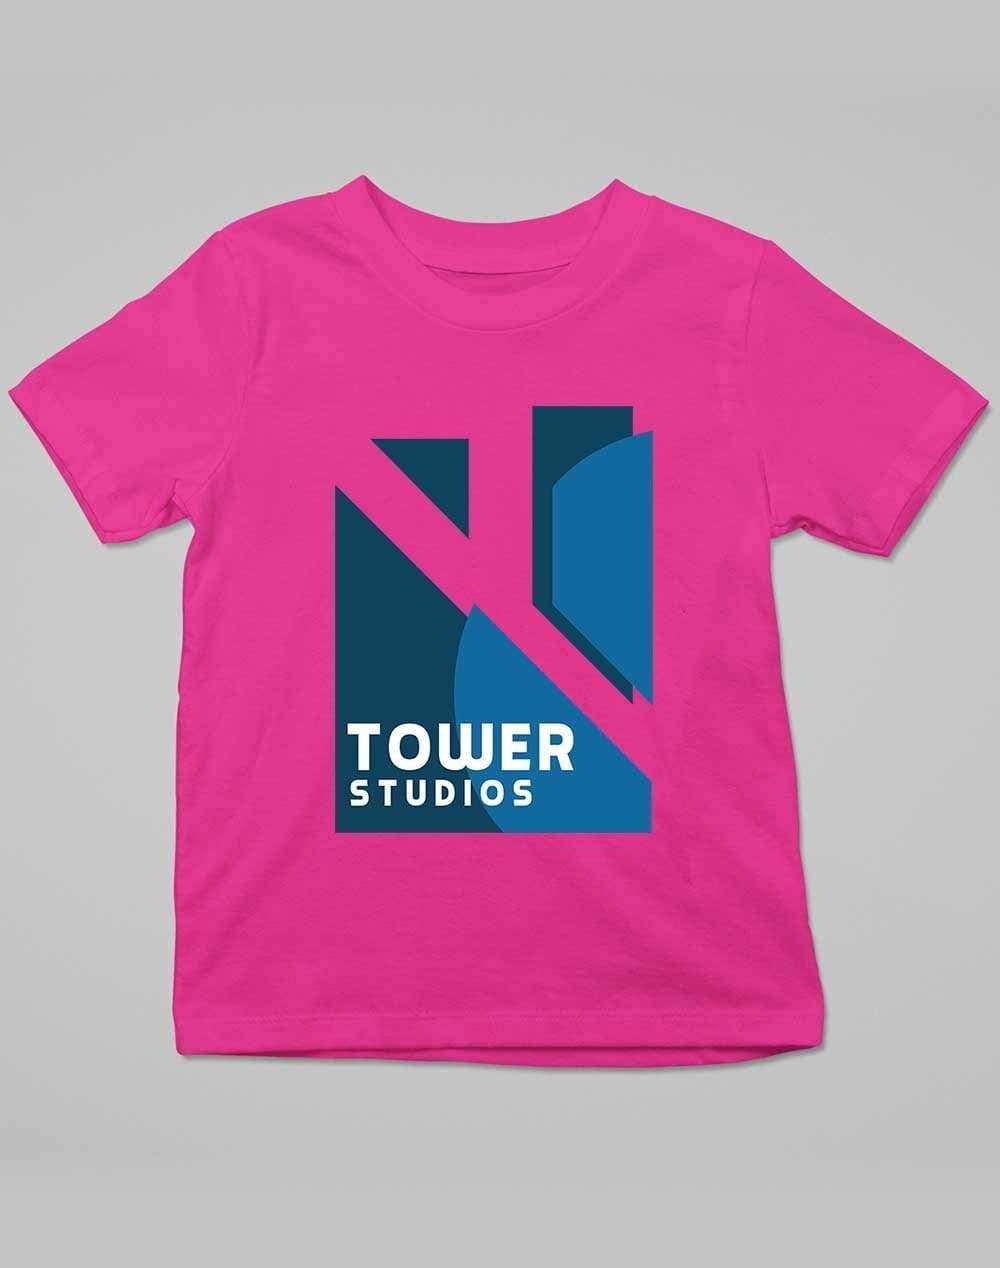 Tower Studios Logo Kids T-Shirt 3-4 years / Orchid Pink  - Off World Tees